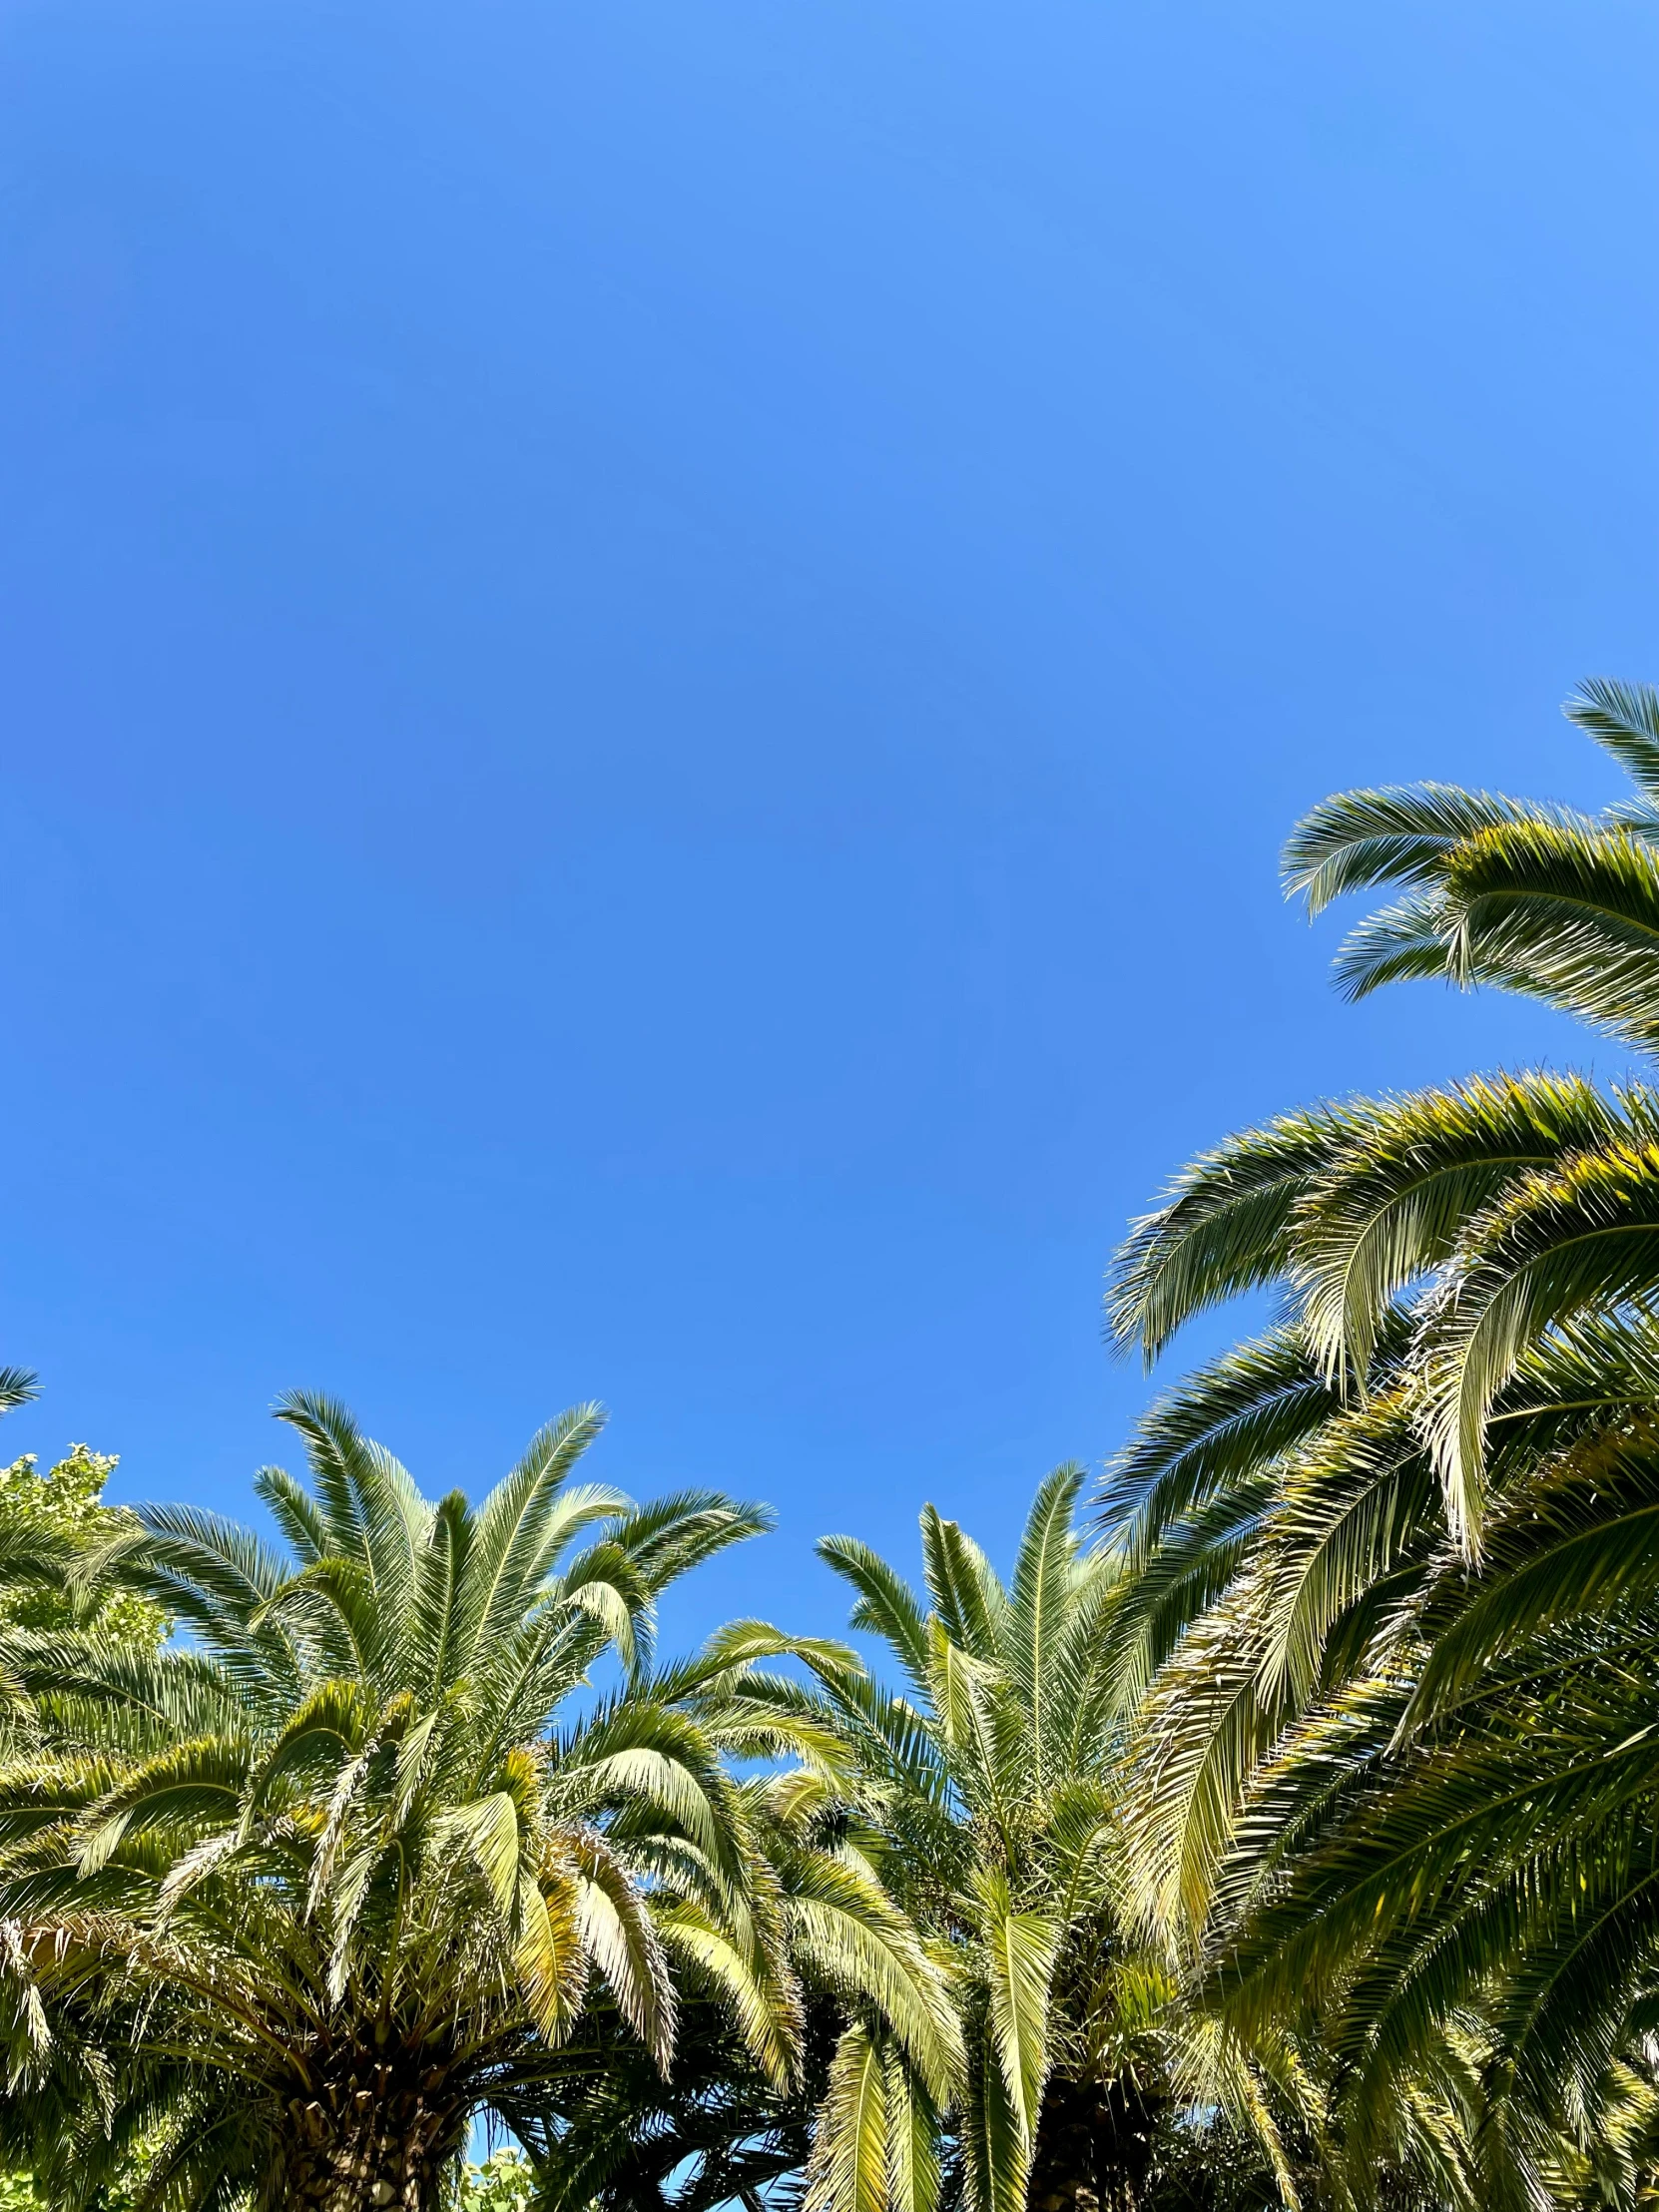 many palm trees are standing up against the blue sky